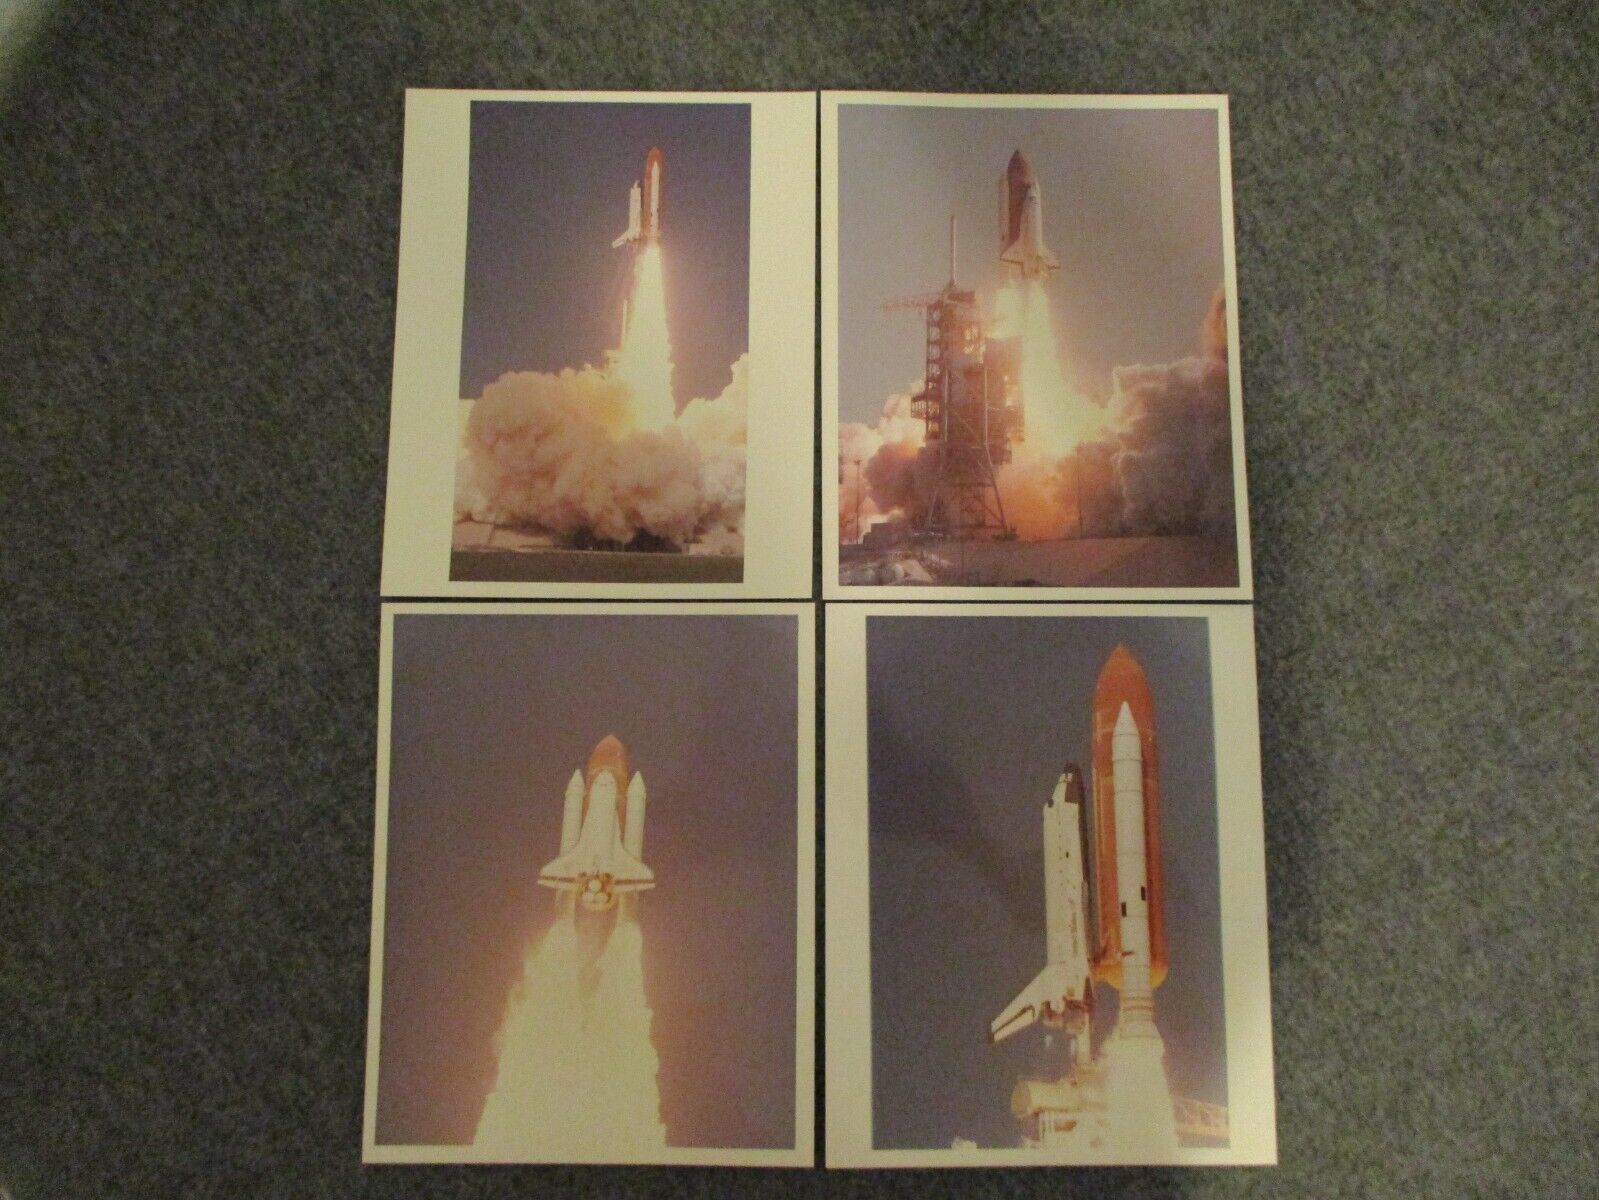 NASA SPACE SHUTTLE CHALLENGER STS-41C LIFTOFF ORIG 1ST GENERATION PHOTOS-4 VIEWS